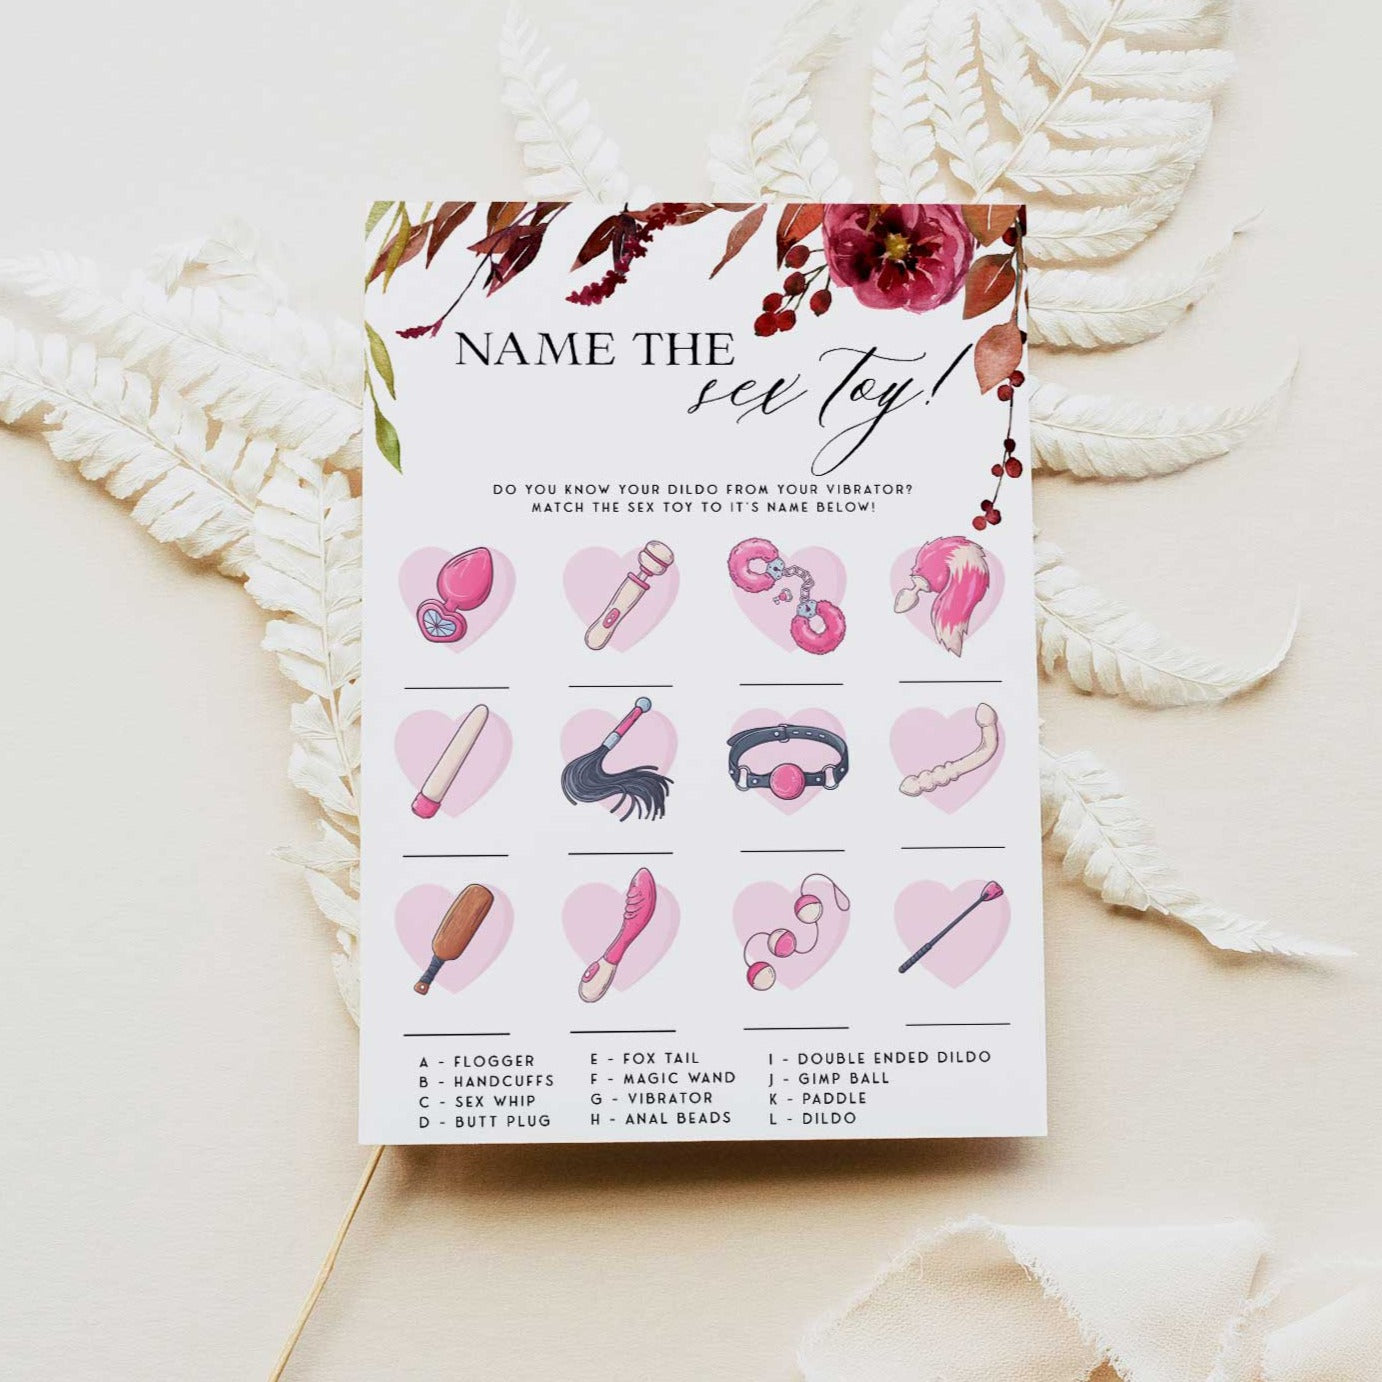 Fully editable and printable name the sex toys games with a Fall design. Perfect for a fall floral bridal shower